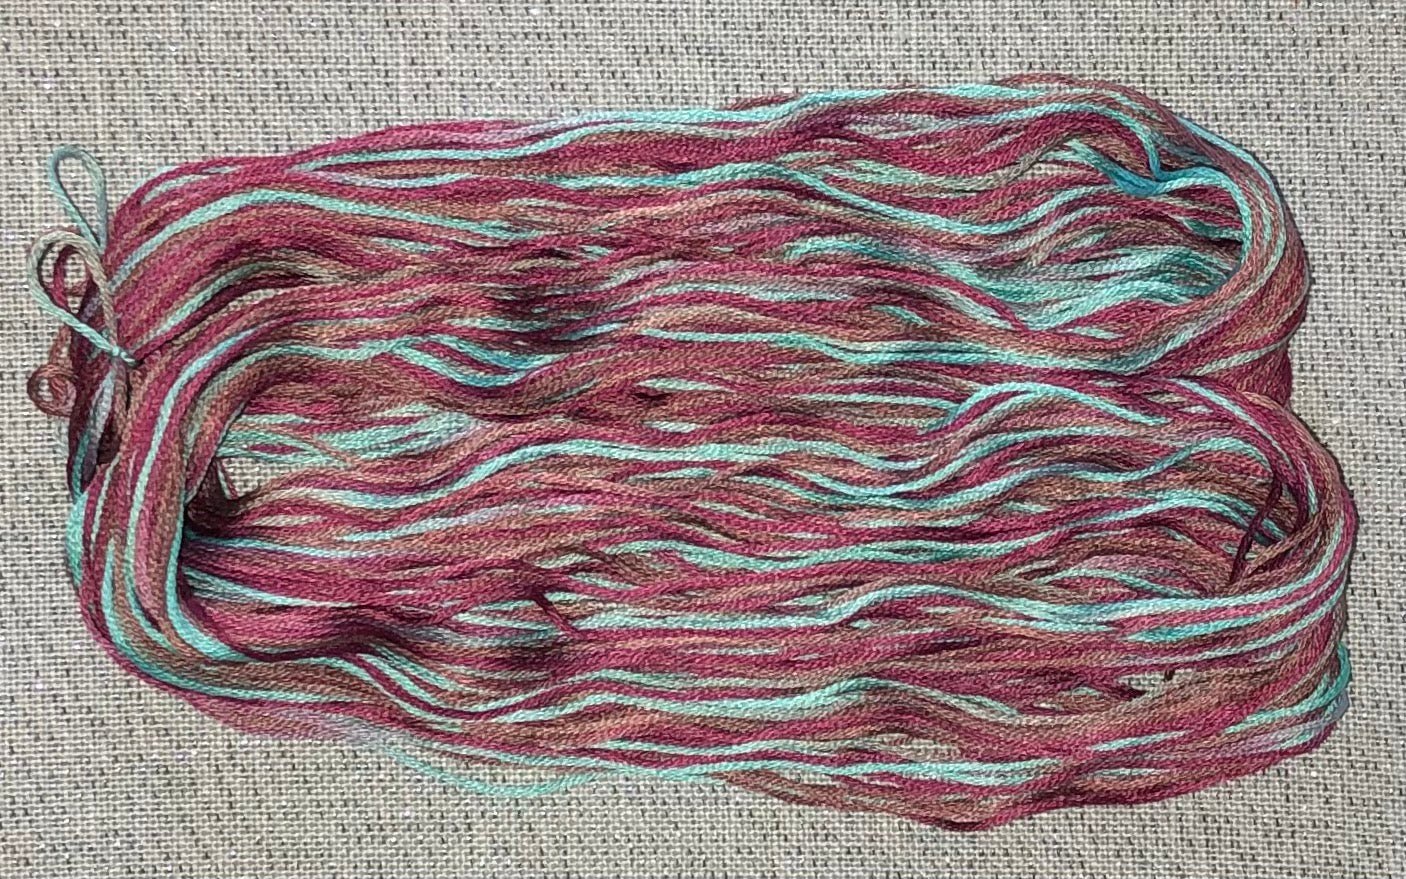 Cotton hand dyed floss - Cranberries - Dyeing for Cross Stitch